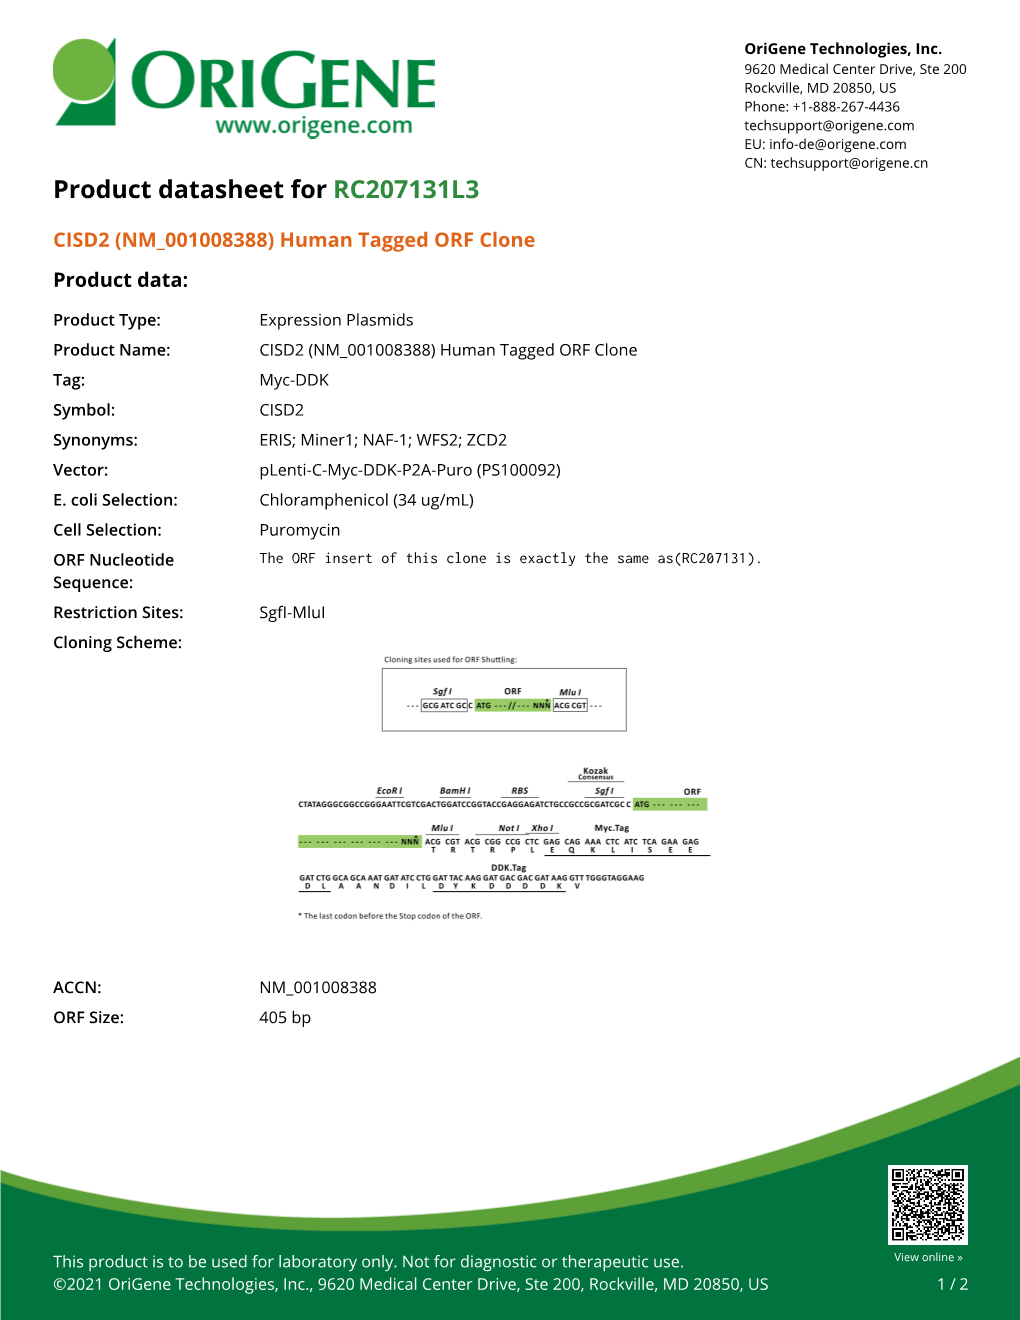 CISD2 (NM 001008388) Human Tagged ORF Clone Product Data